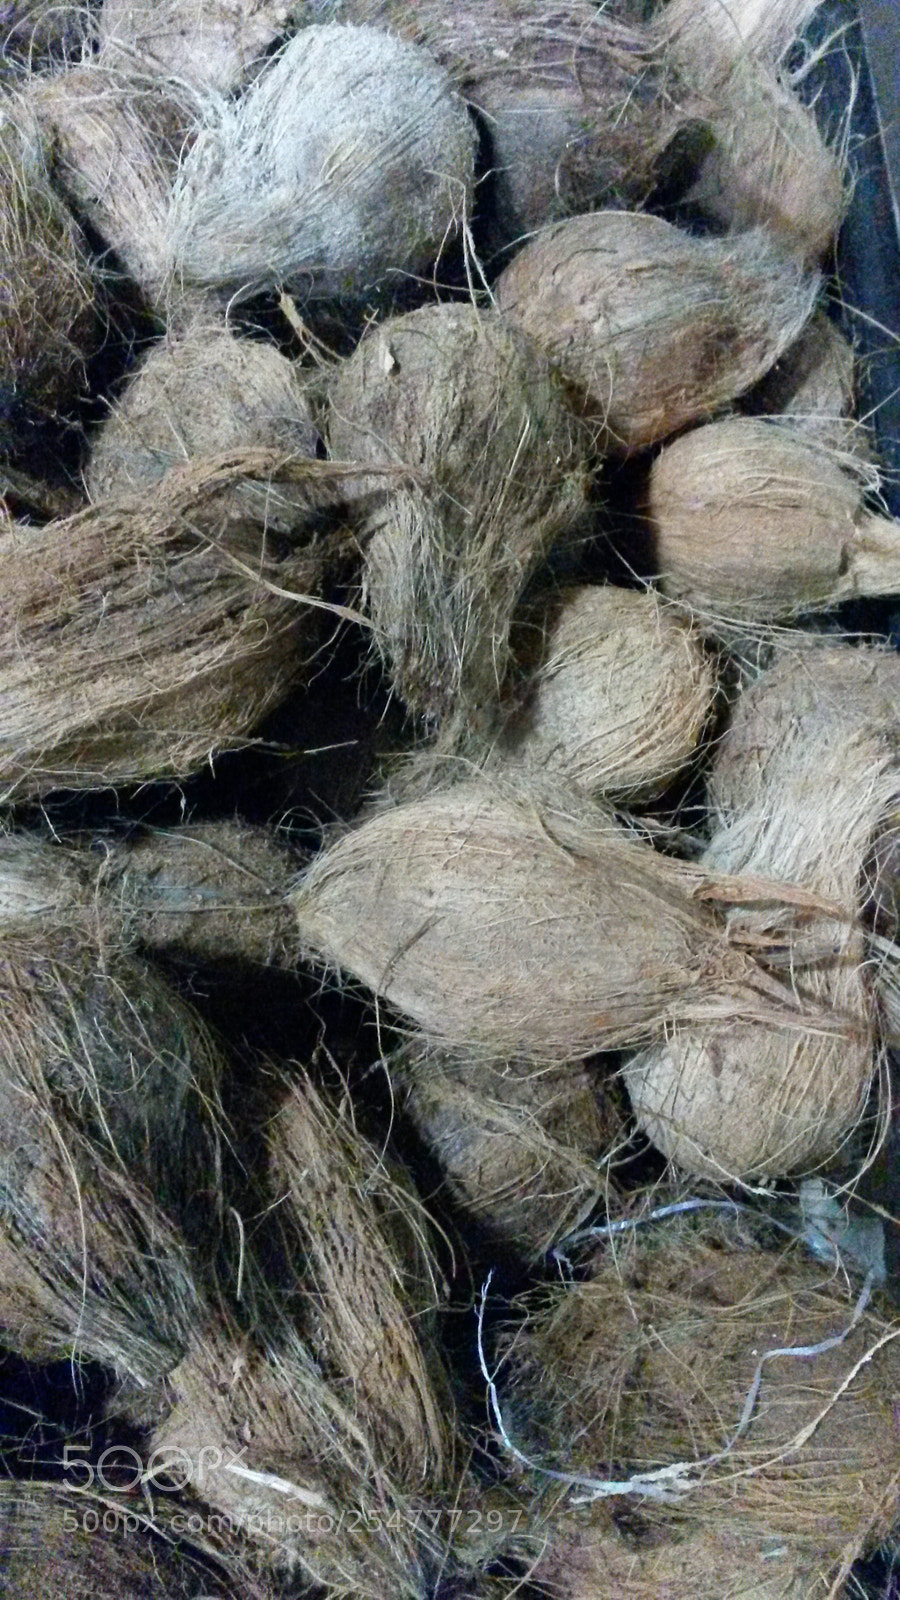 Samsung Galaxy S4 Mini sample photo. Coconuts for sale photography